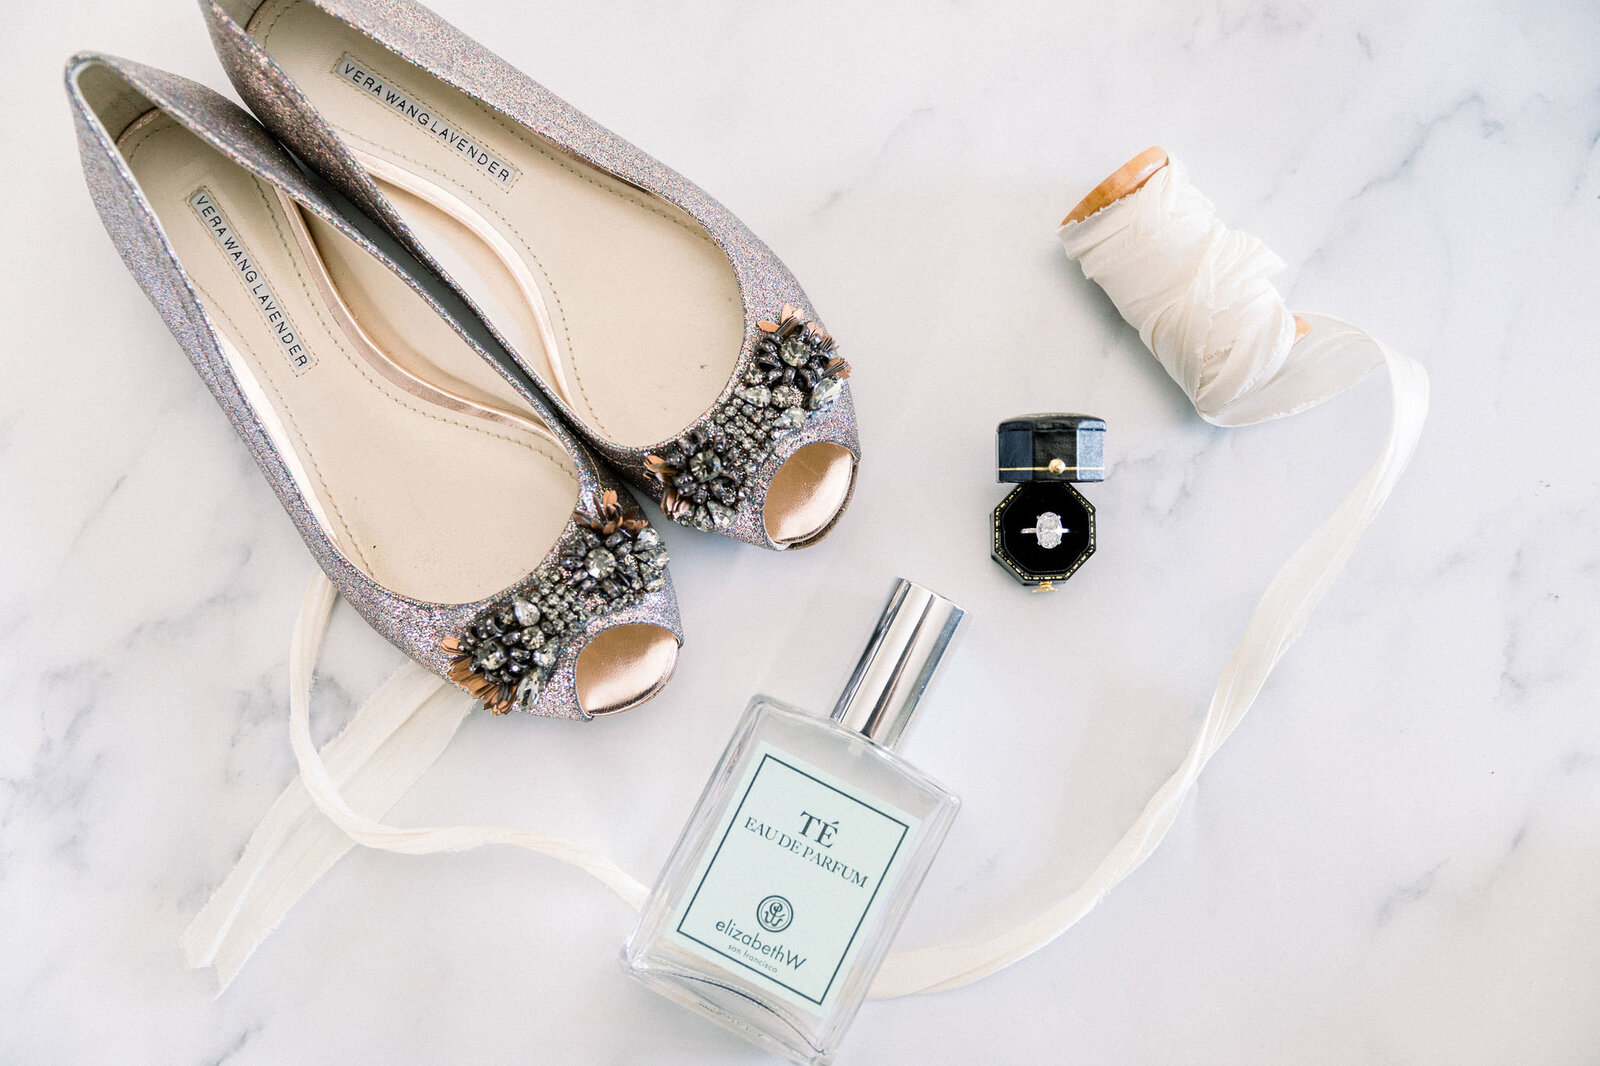 details of shoes, ring, and bridal perfume